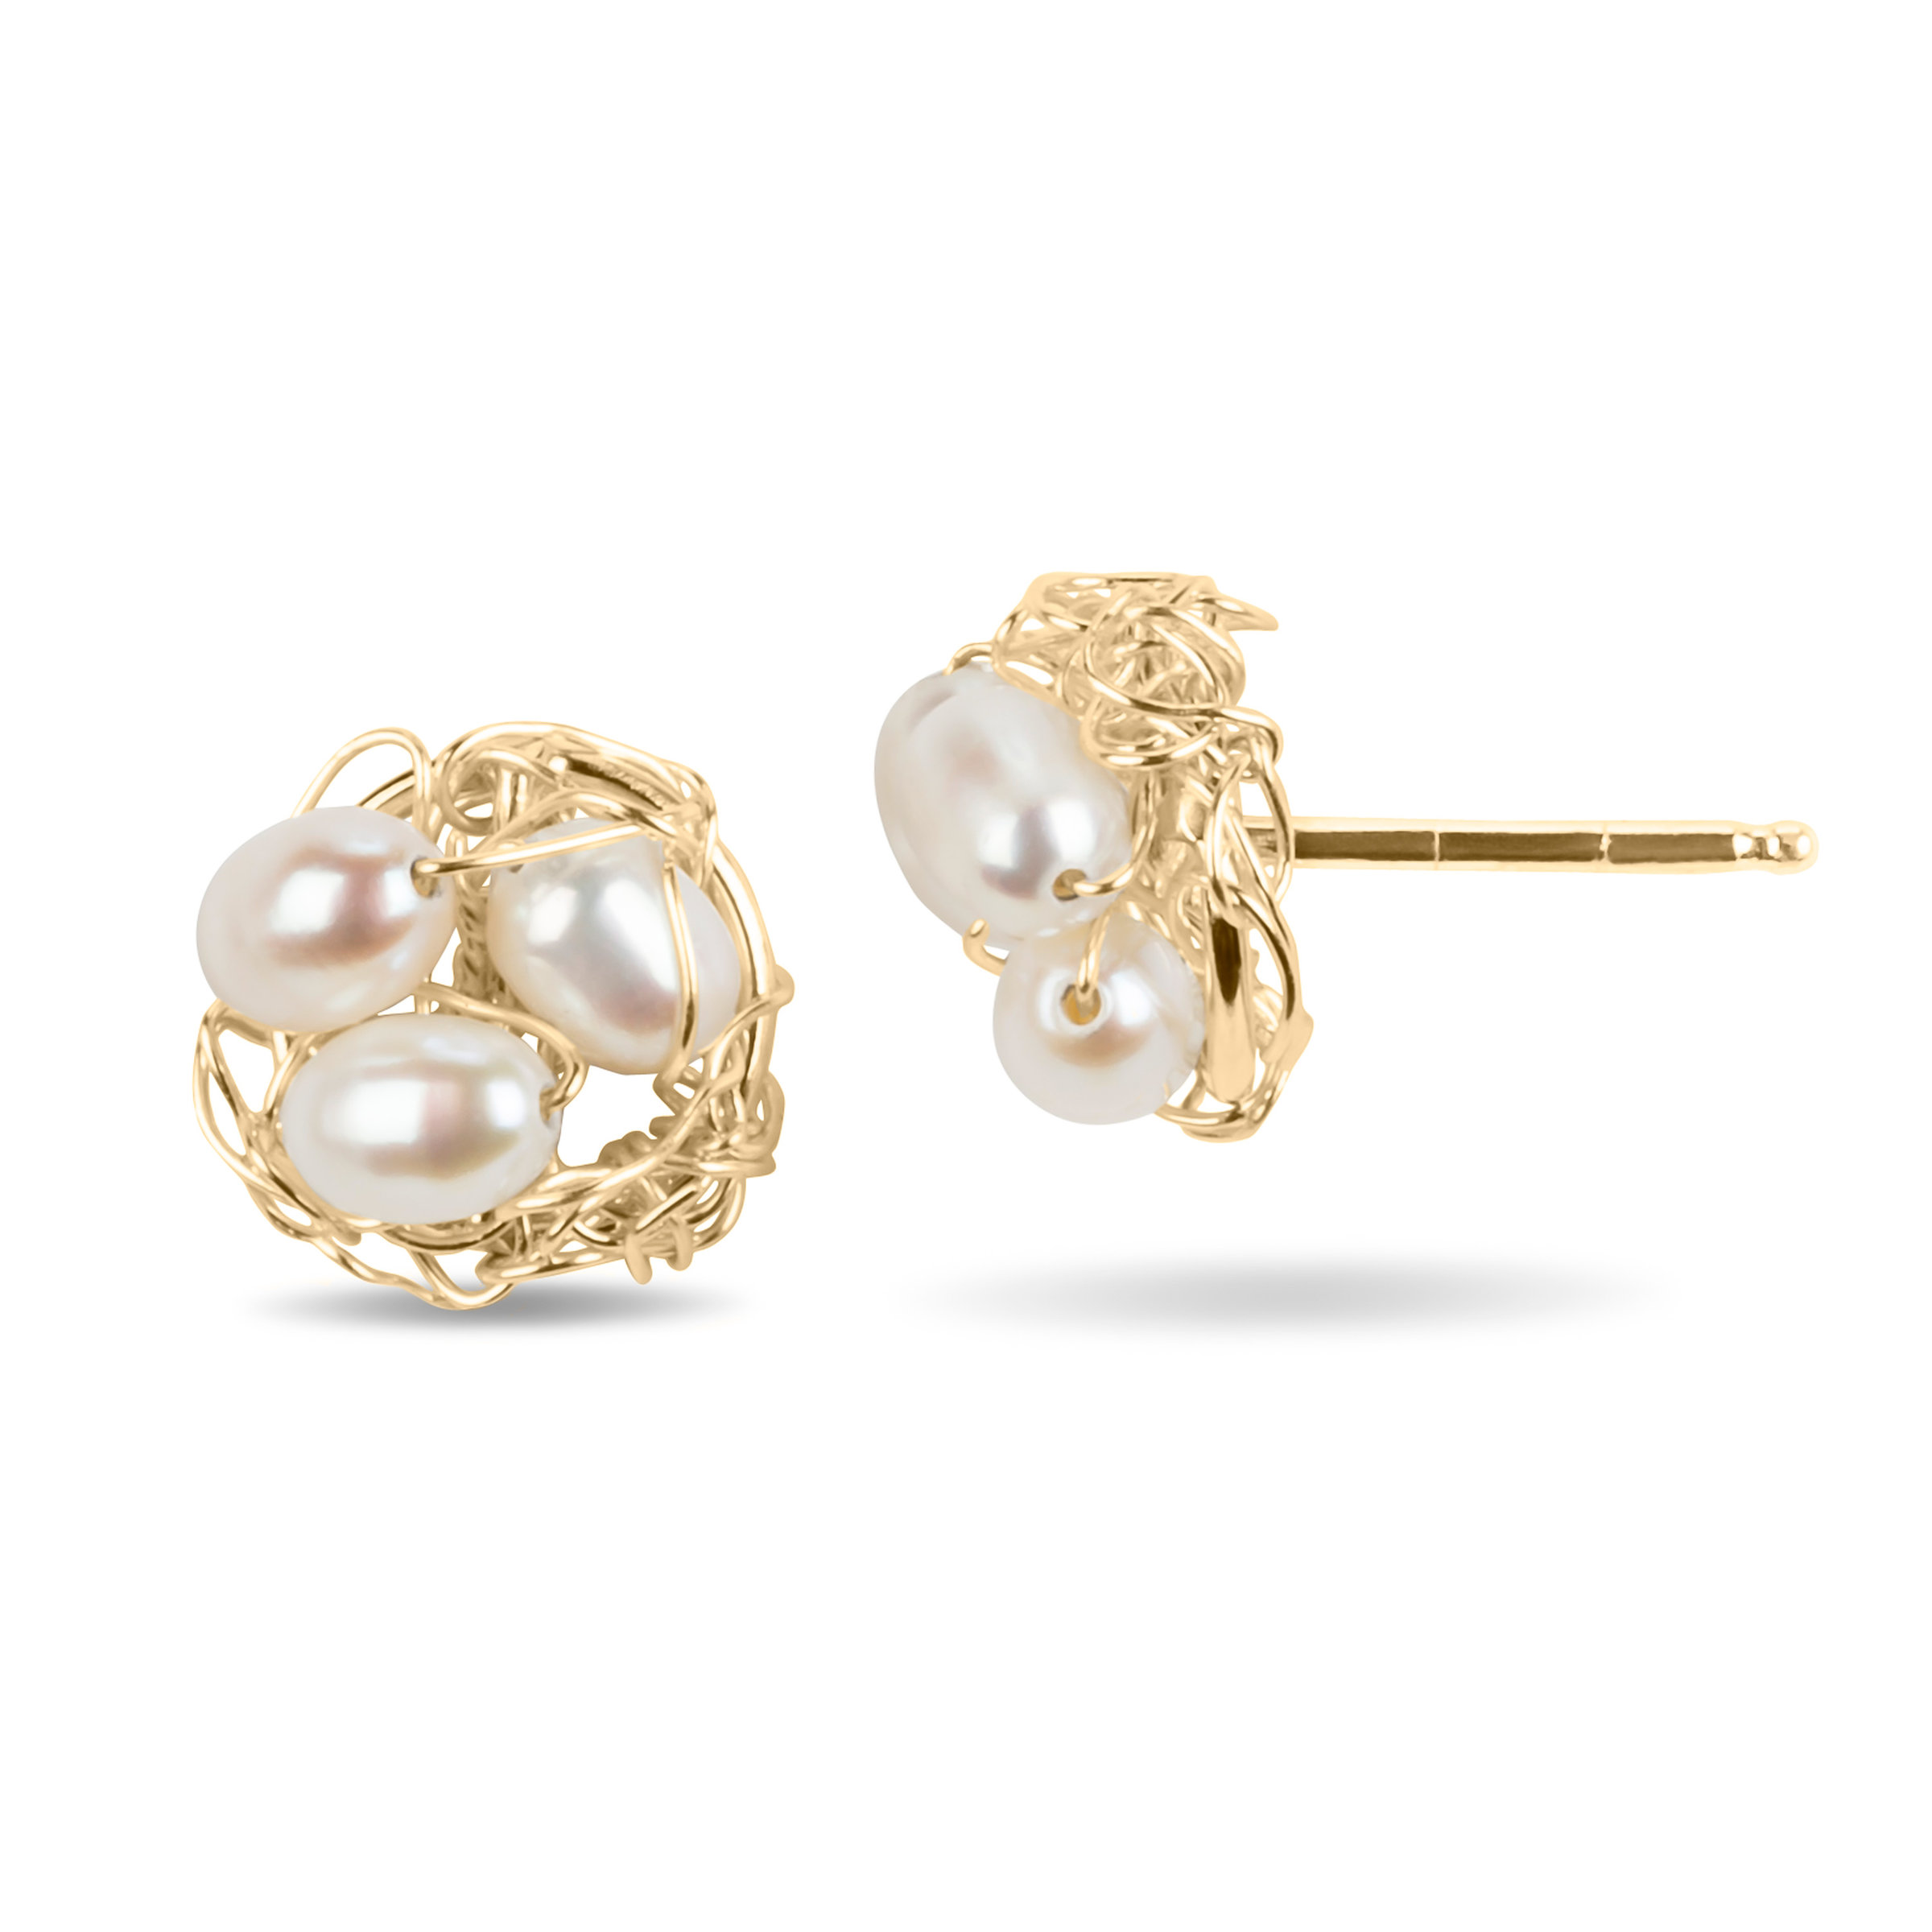 Nest Post Earrings with Freshwater Pearls by Randi